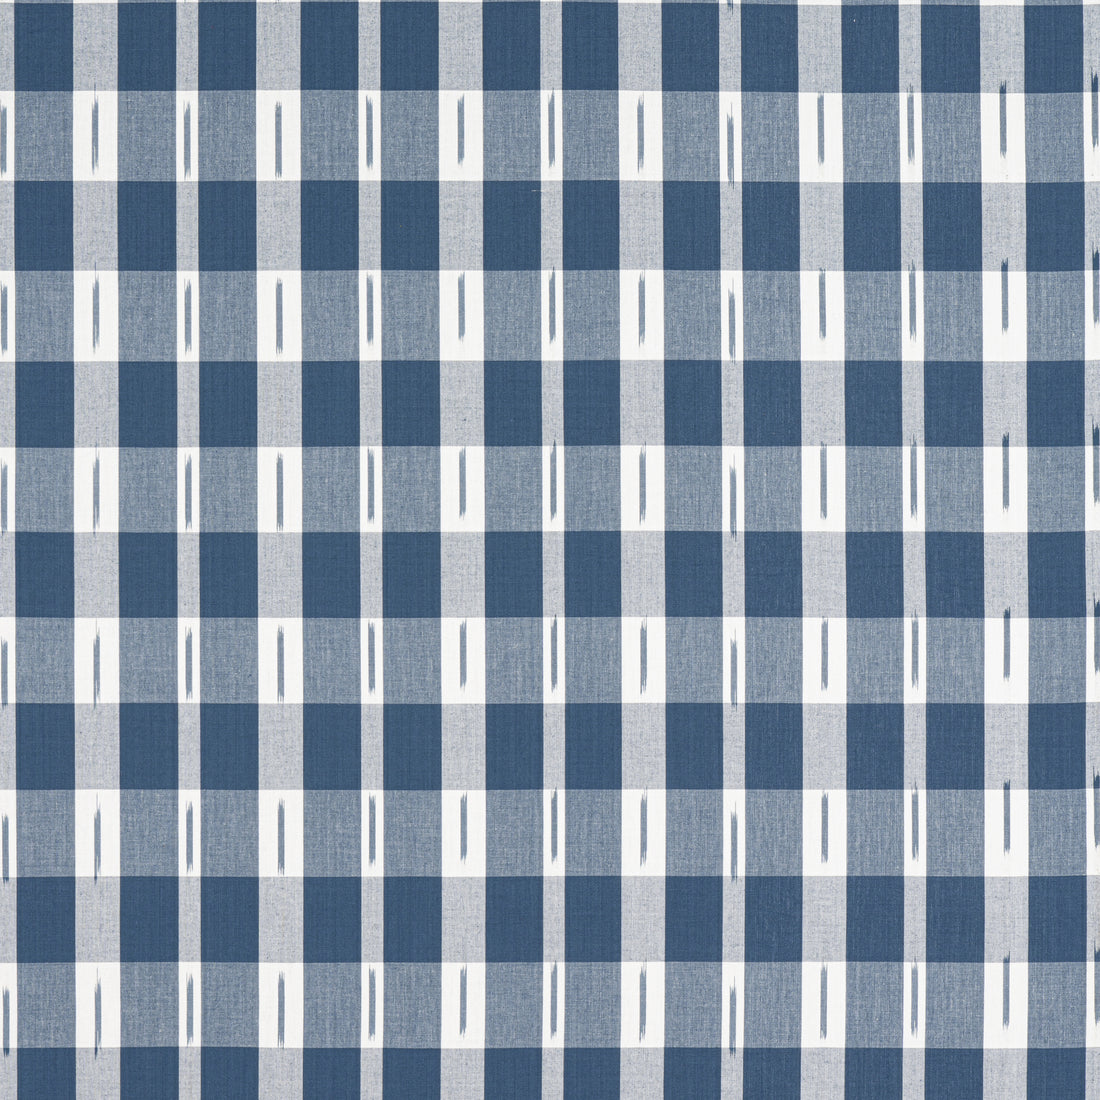 Ellastone Check fabric in navy color - pattern number W736439 - by Thibaut in the Indienne collection